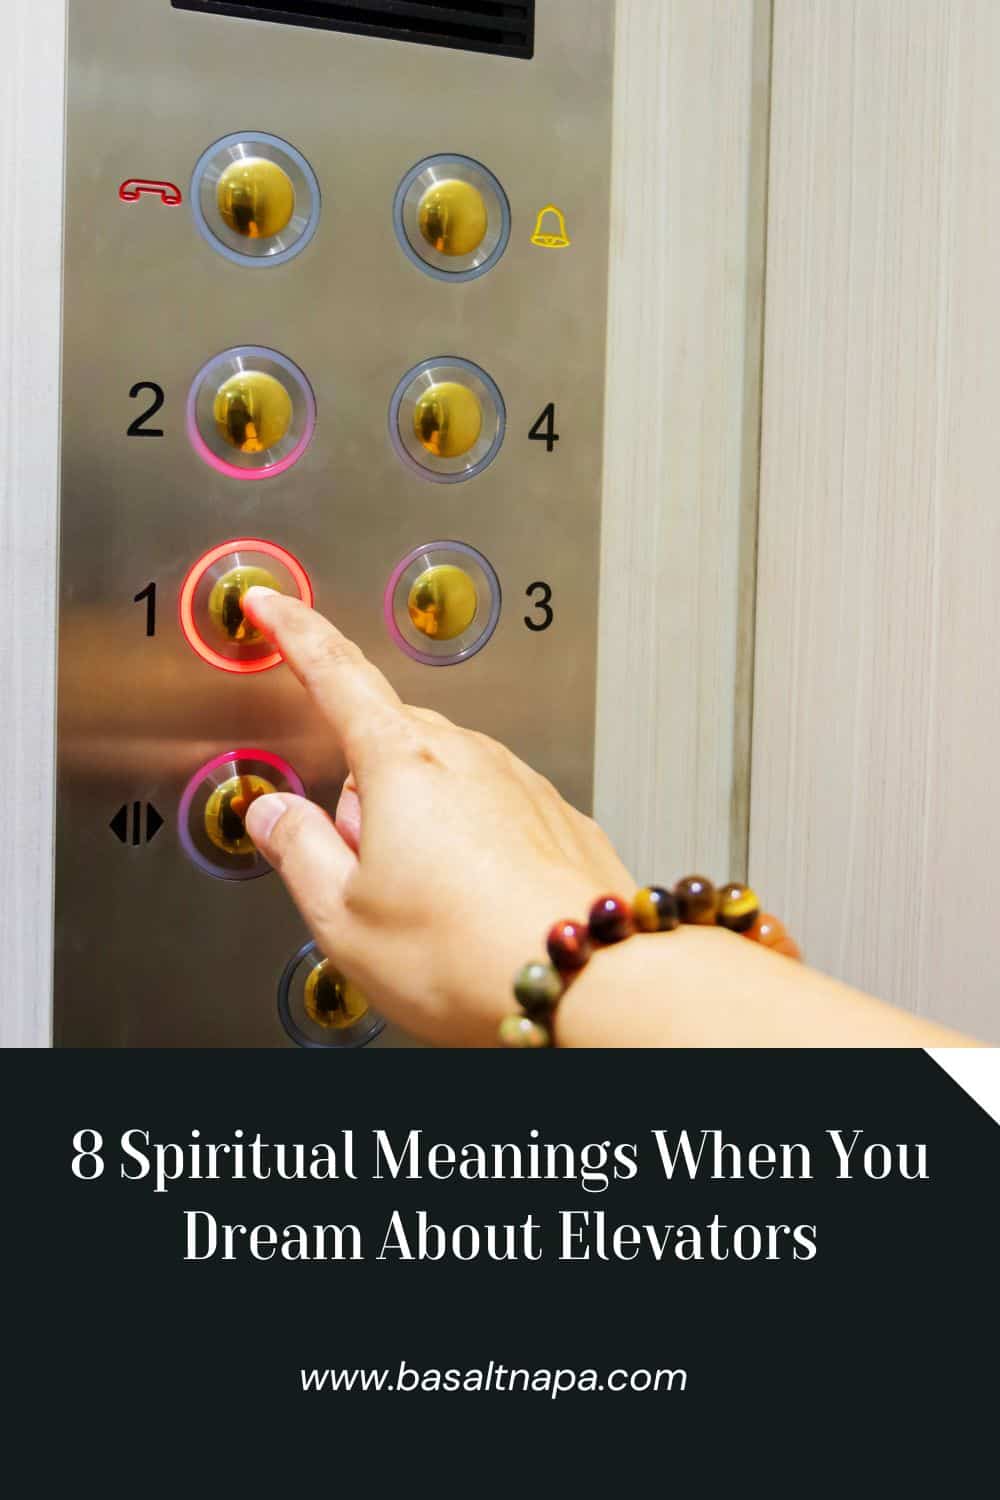 8 Spiritual Meanings When You Dream About Elevators